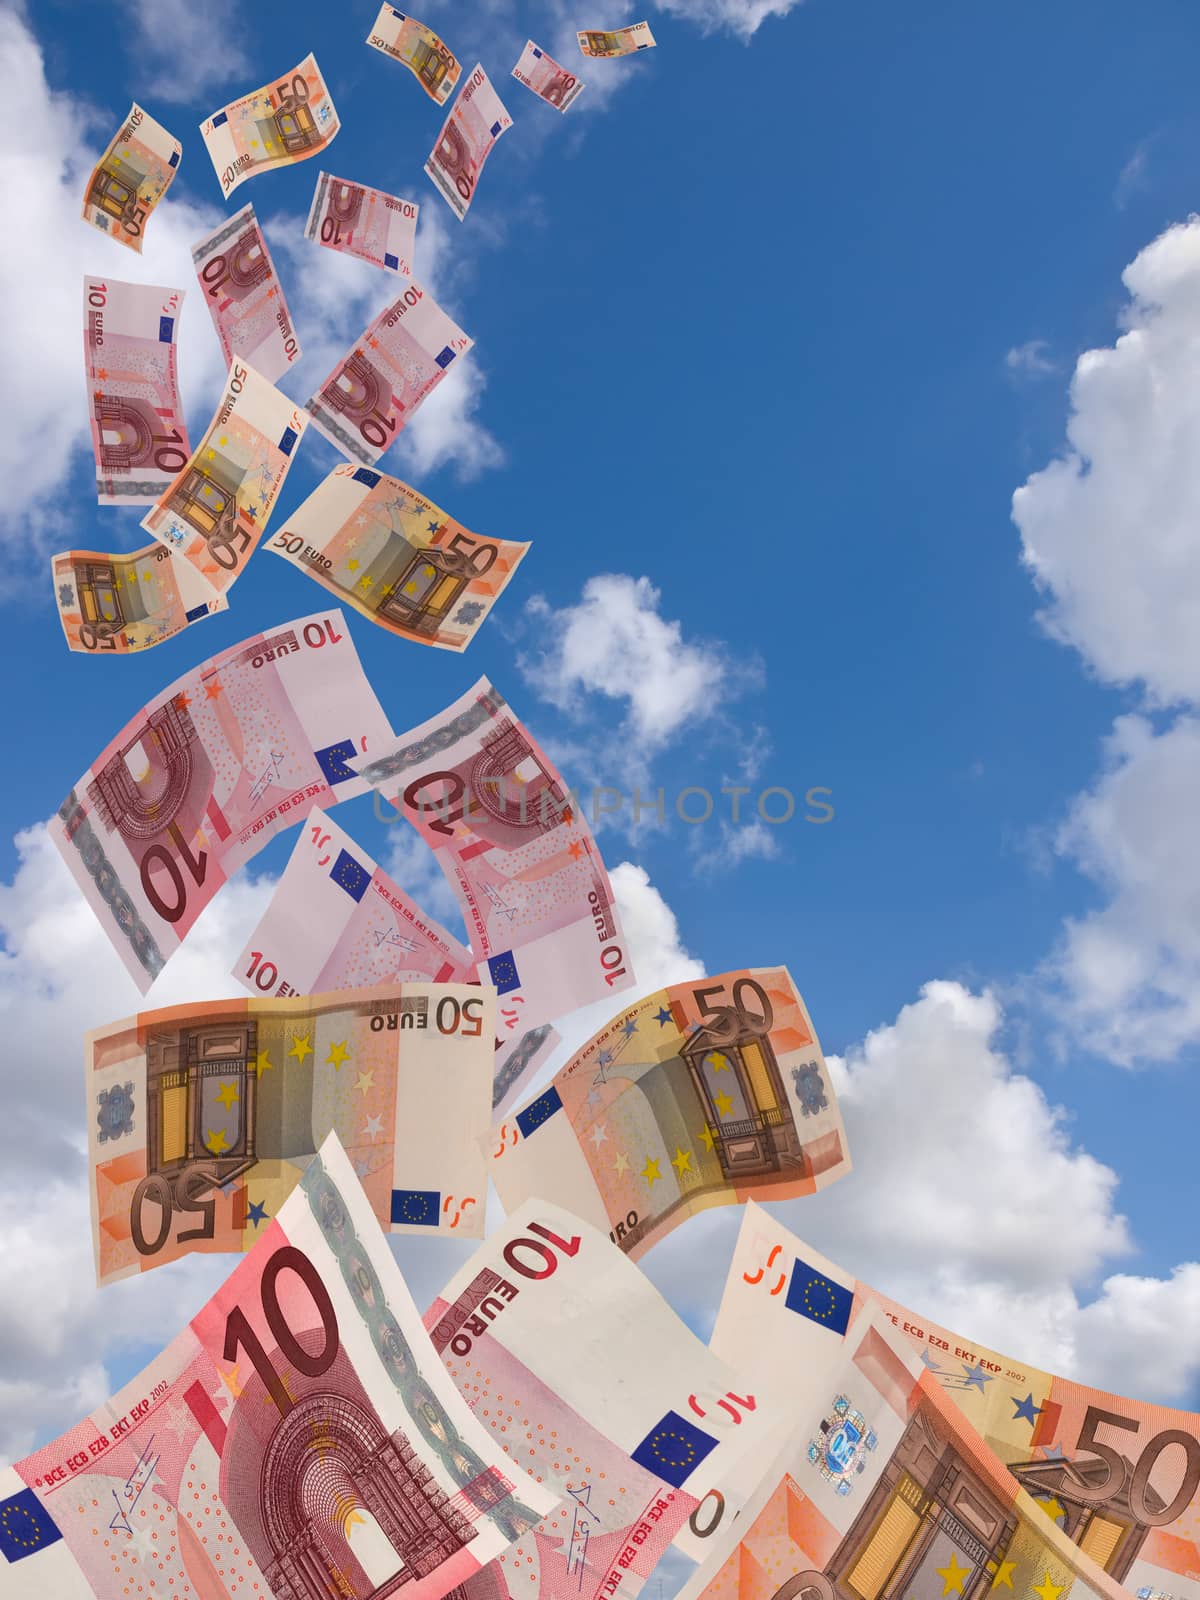  a lot of flyinq away banknote on  a sky background by sette